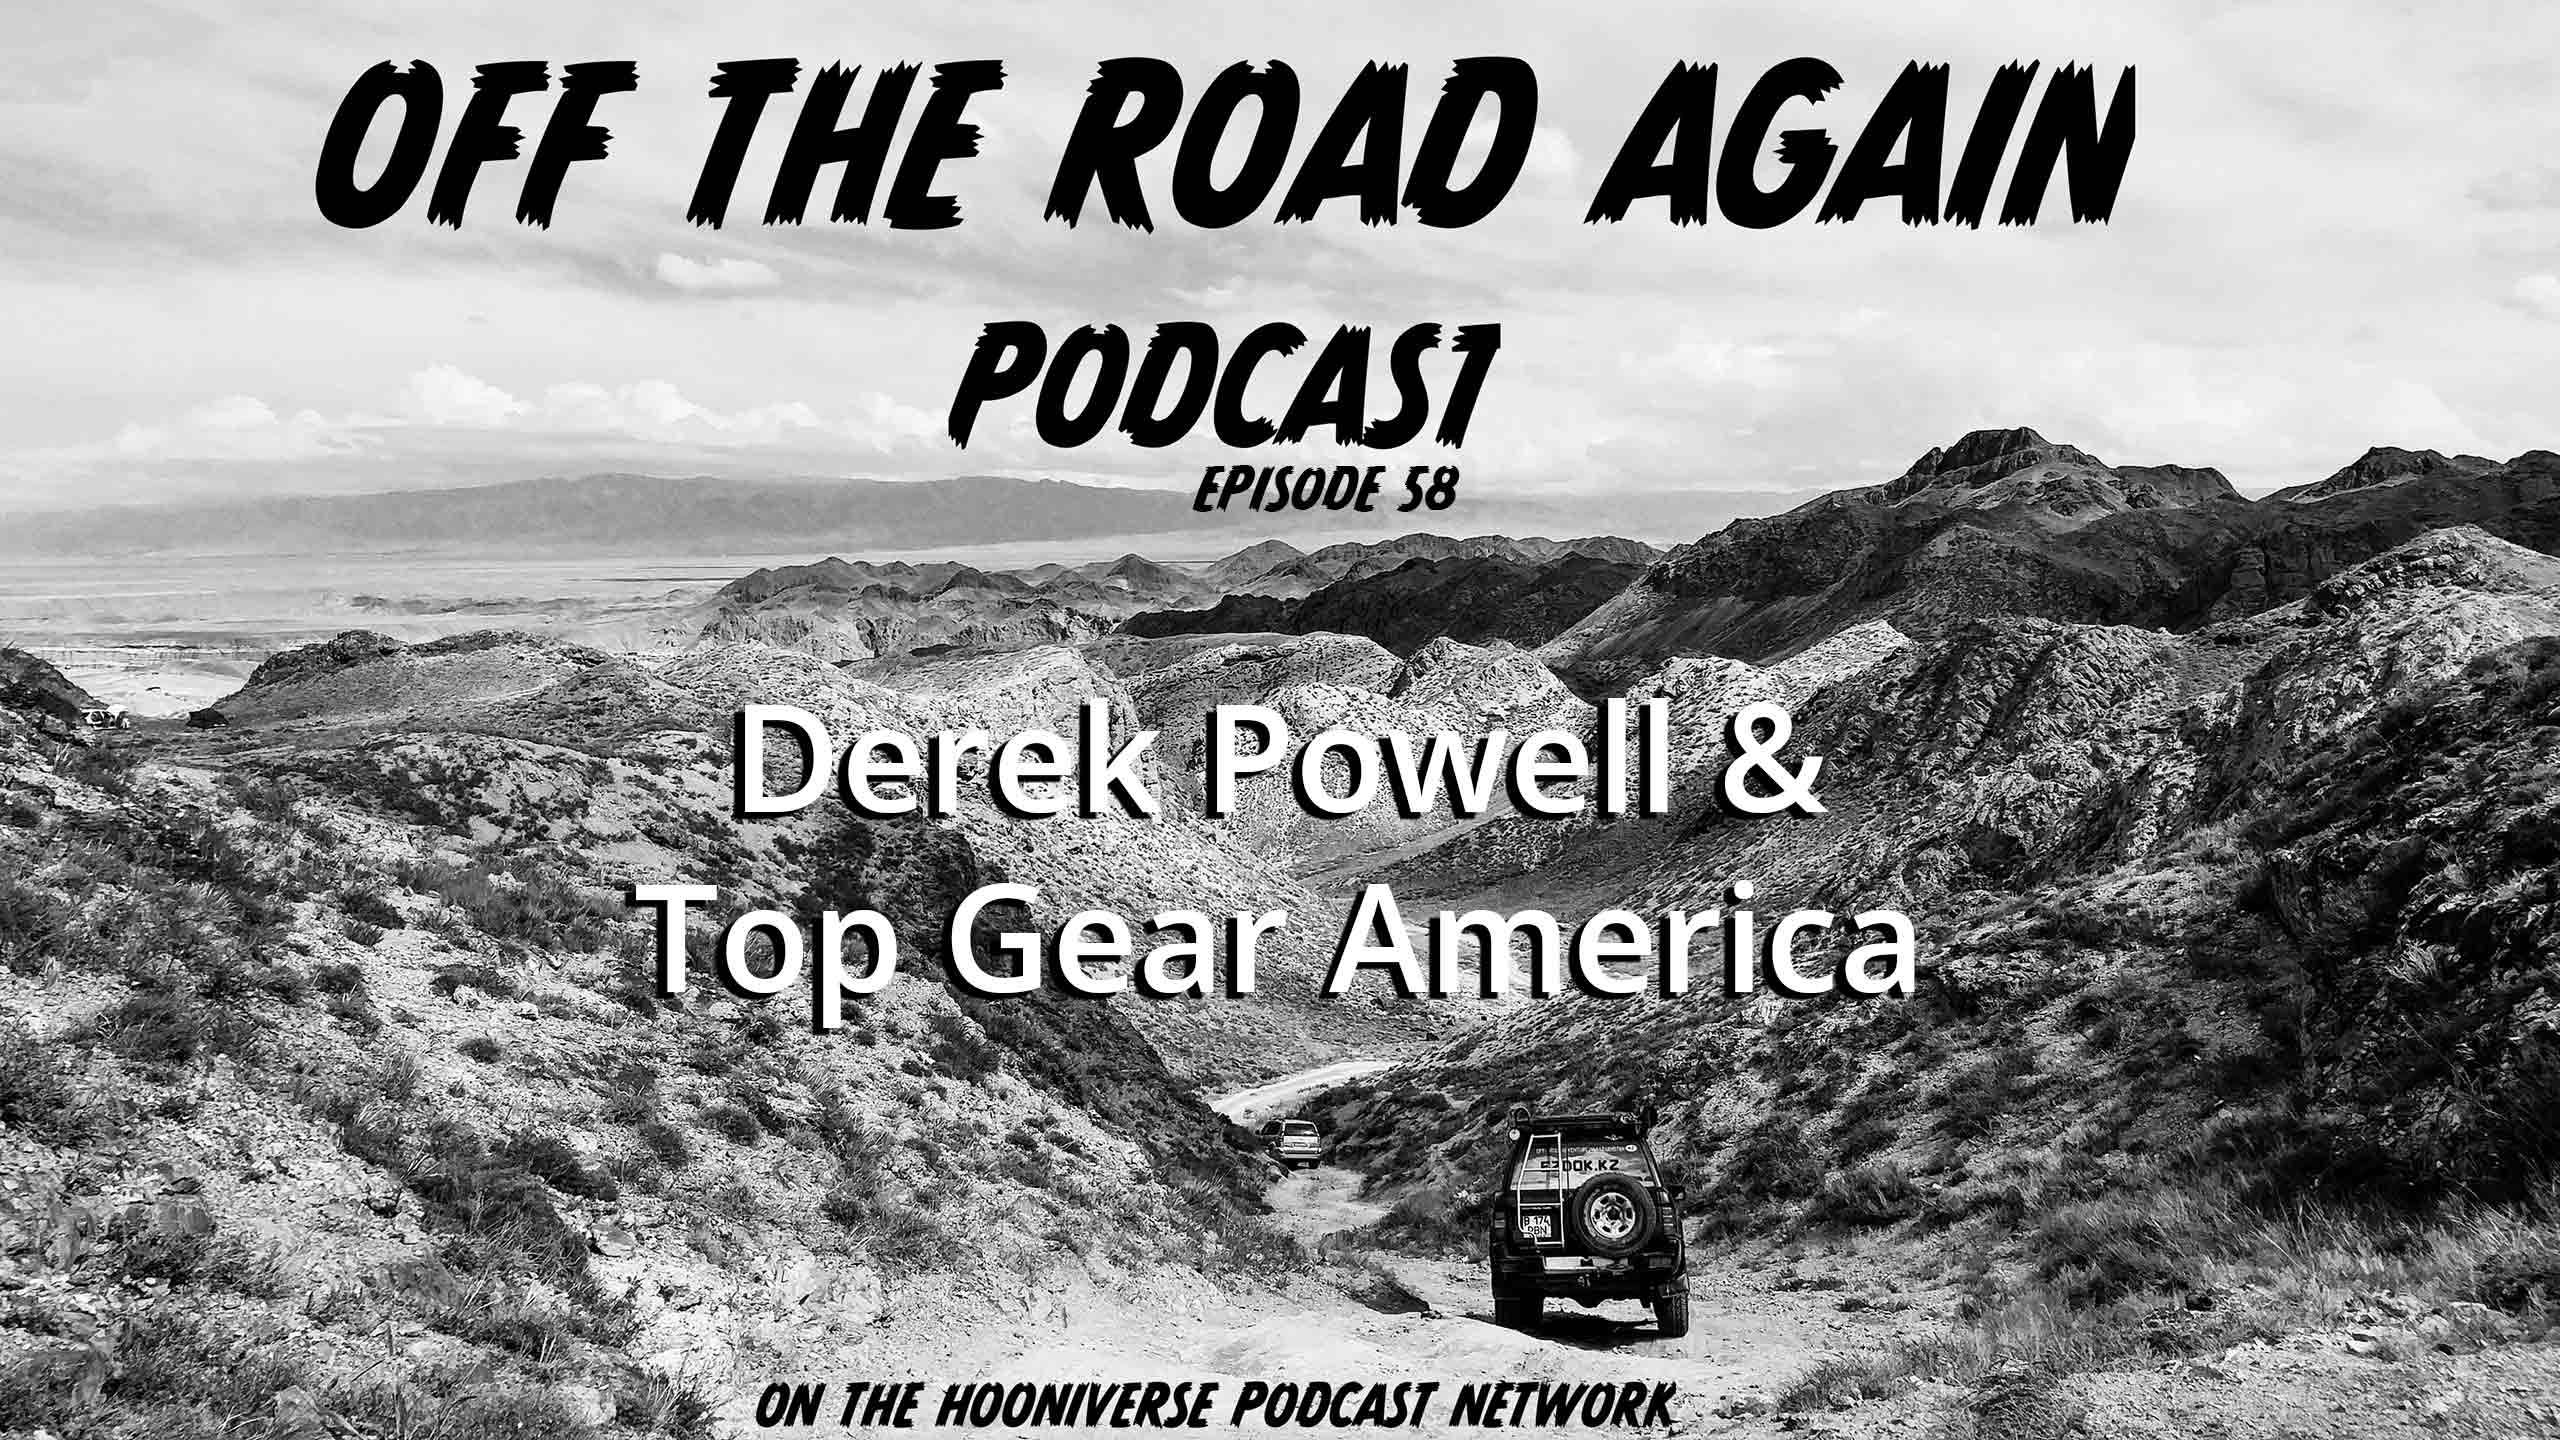 Derek-Powell-Top-Gear-America-Off-The-Road-Again-Podcast-Episode-58